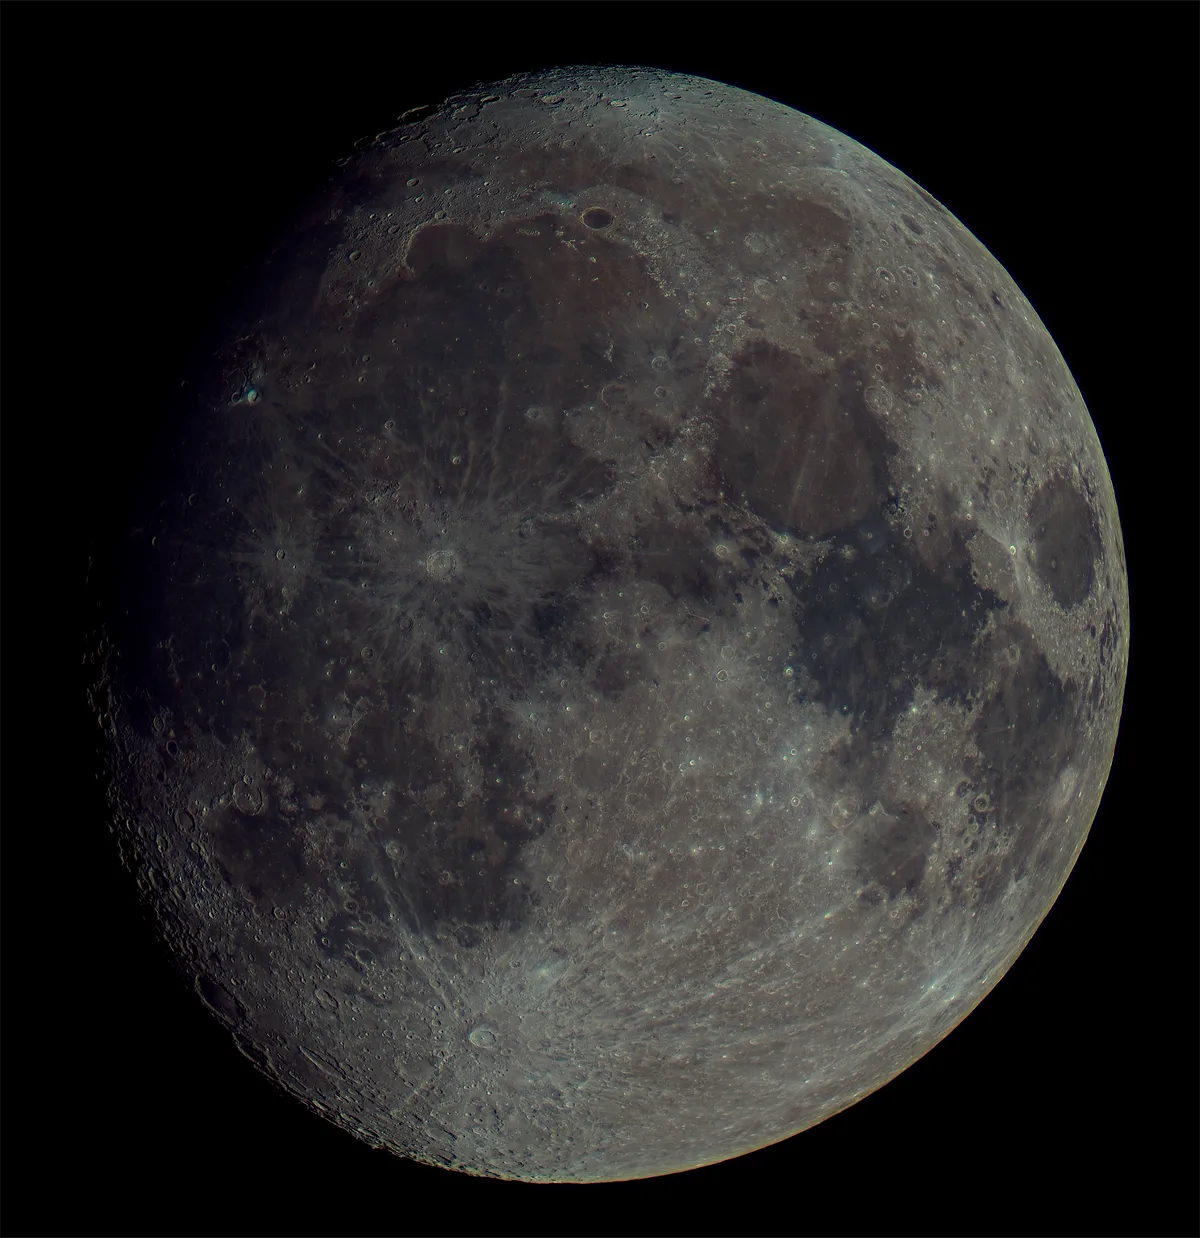 Waxing Gibbous November Moon by Mark Forbes, Stockport, UK. Equipment: Altair Astro StarWave 102ED Refractor, Altair IMX178 colour Hypercam, AltairCapture.